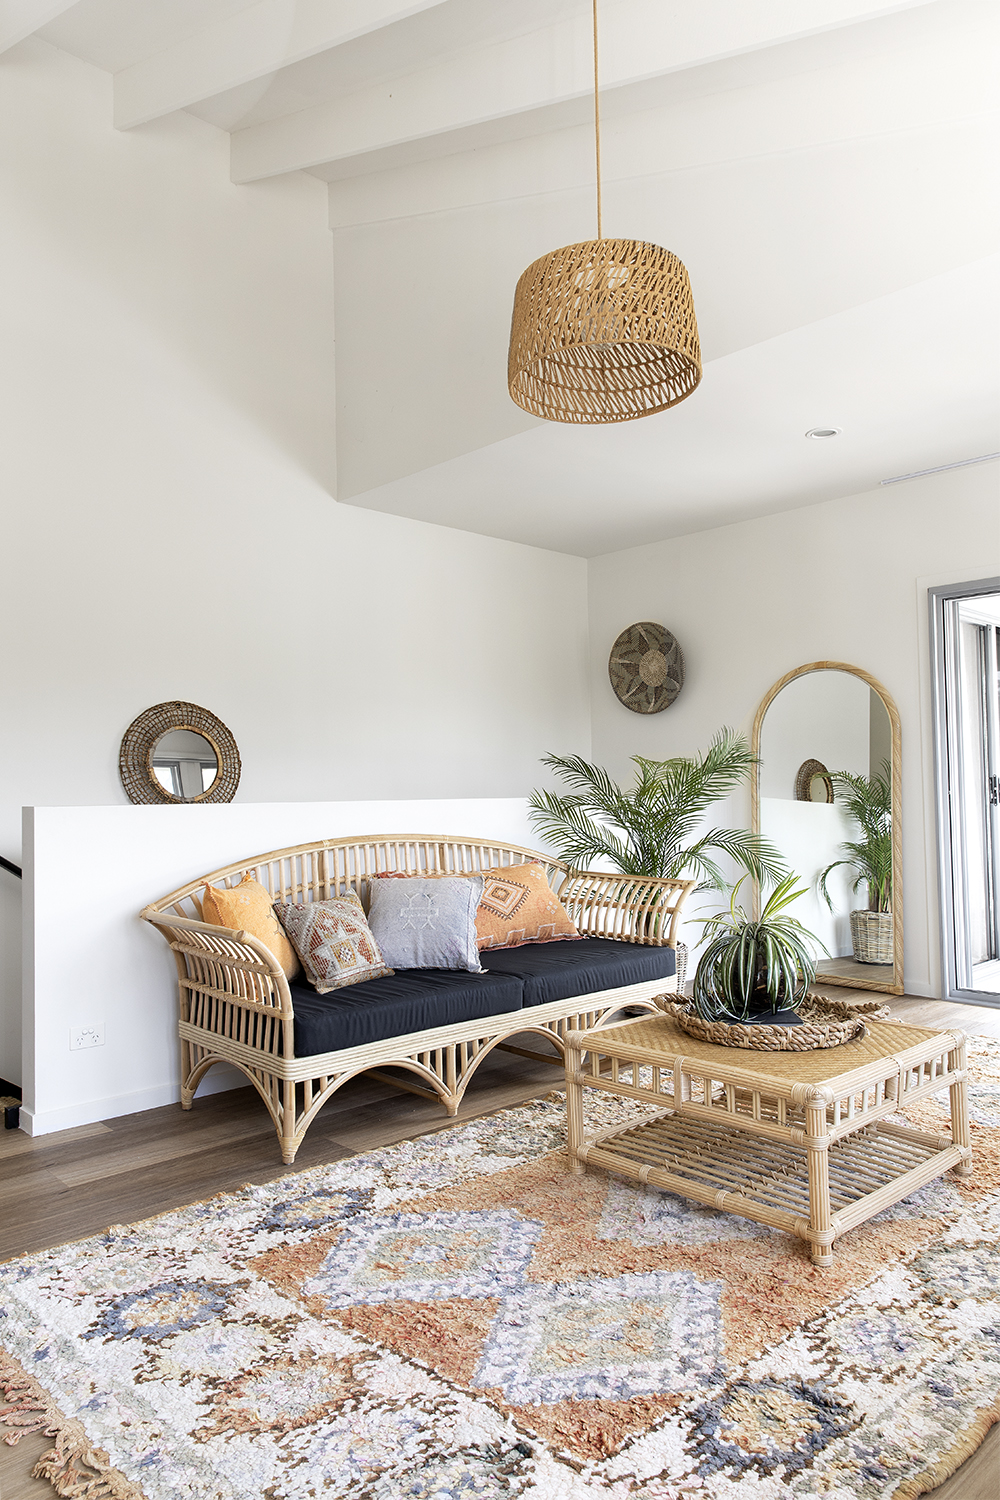 Dreamy beach vibes and boho styling at Avalon Abode - Style Curator